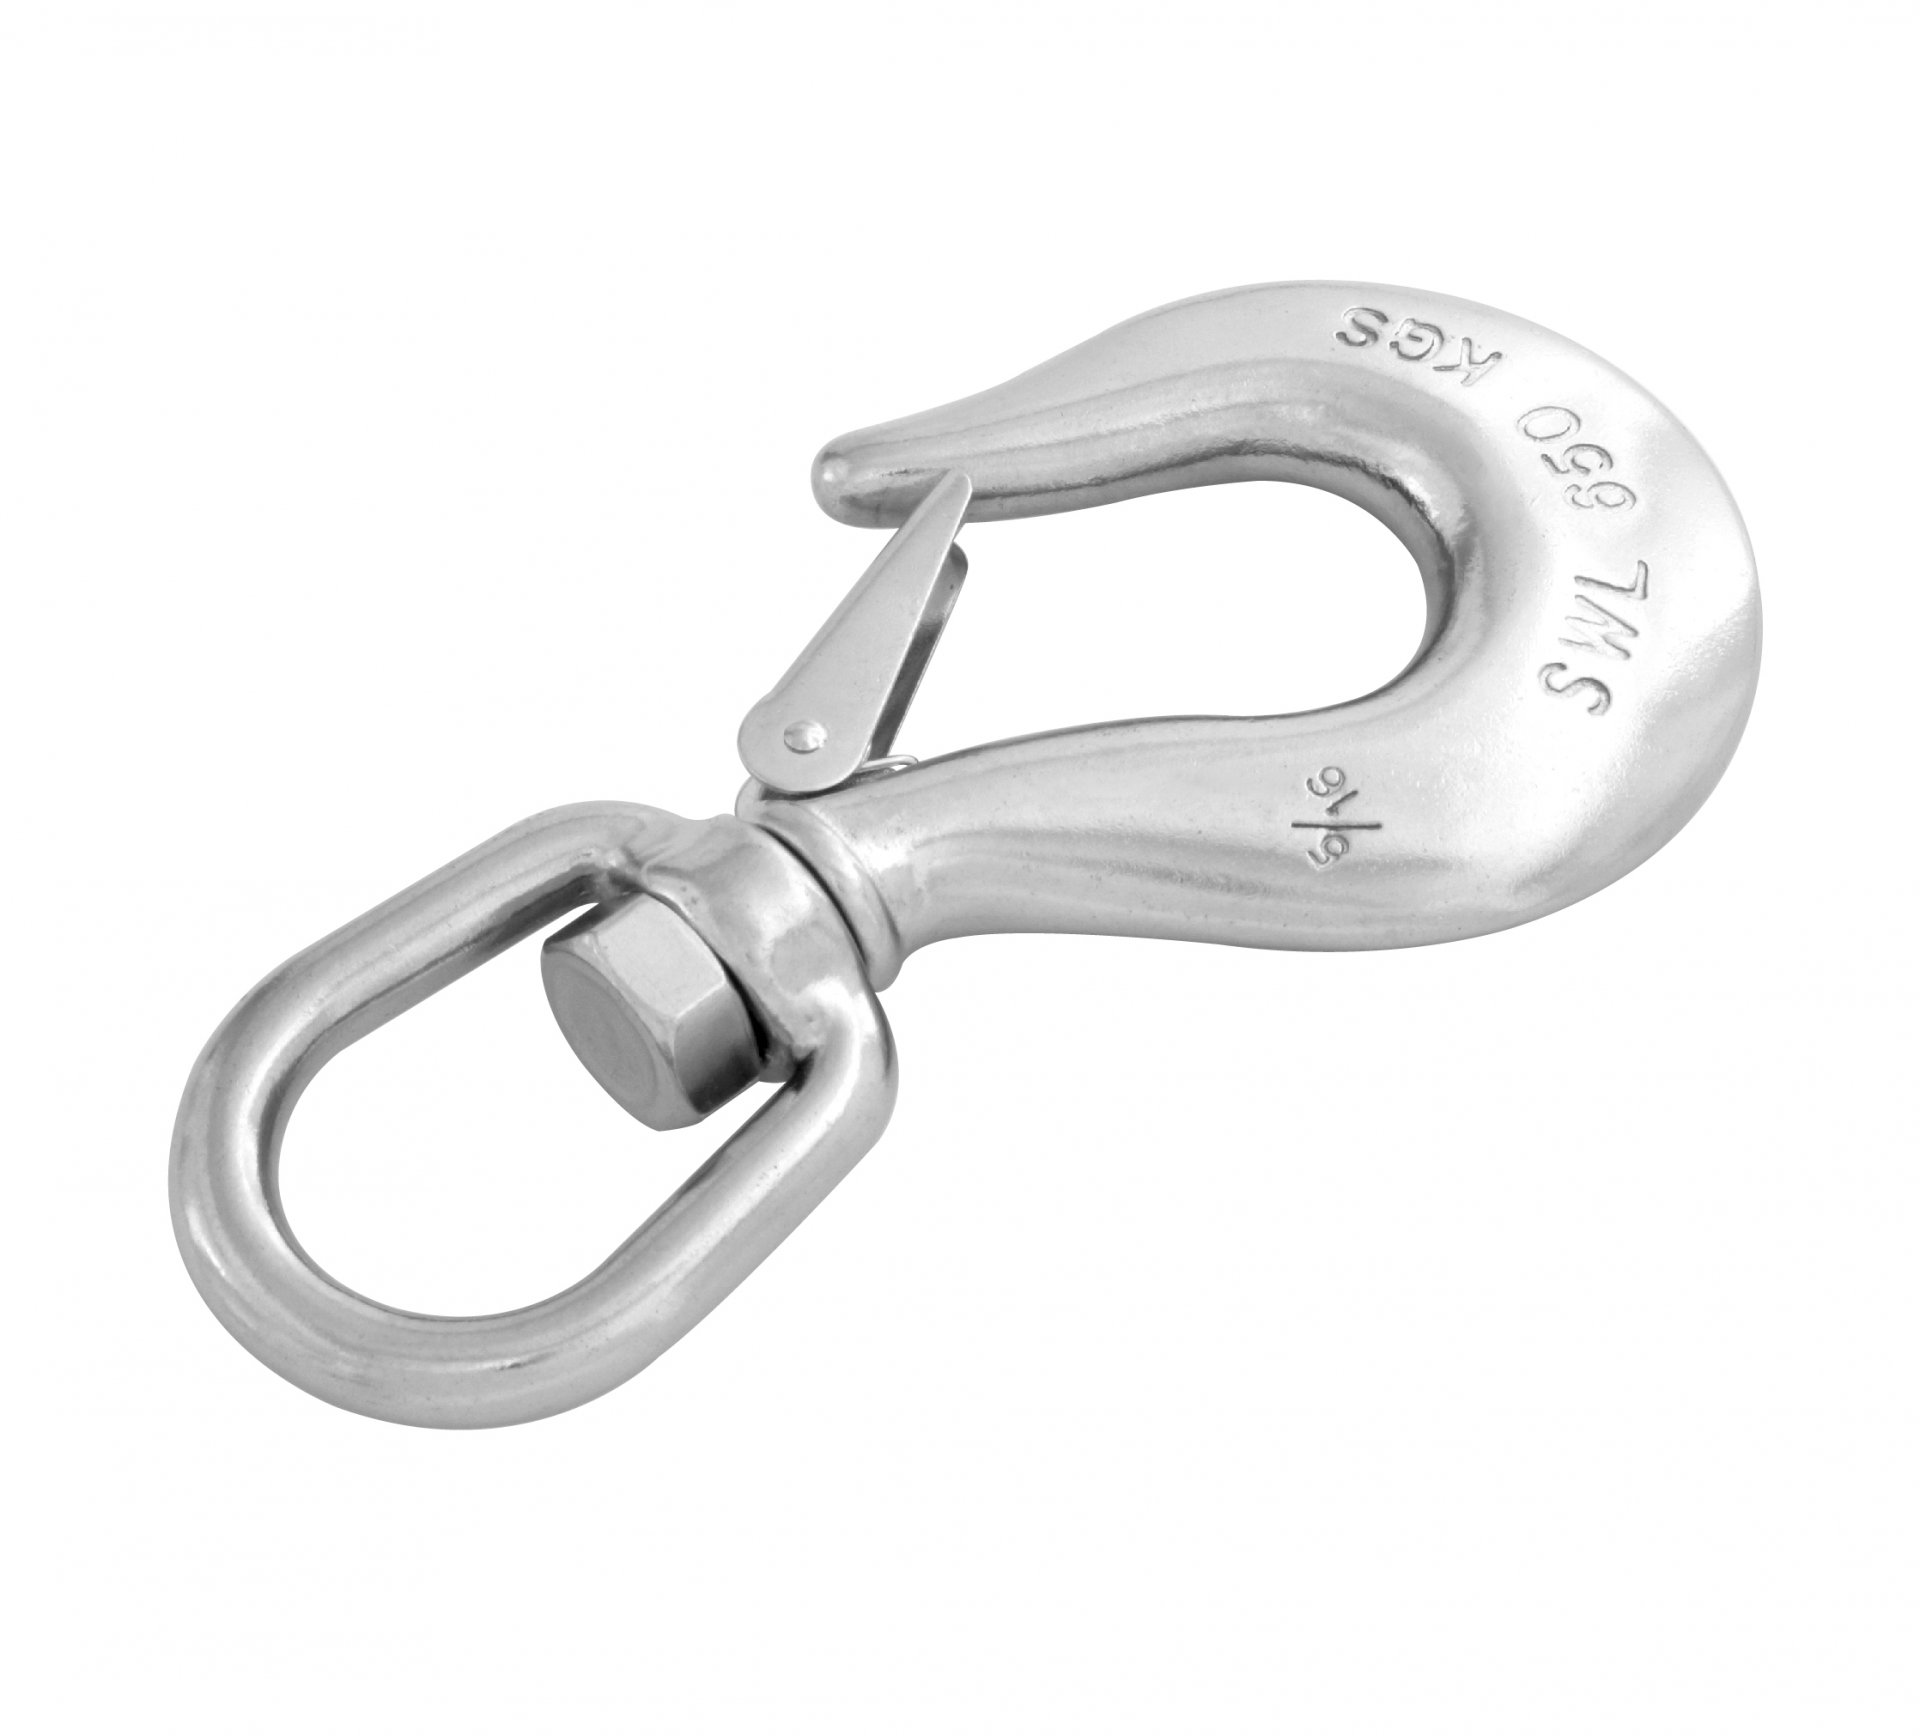 Slip hook (swivel end with safety lacth)